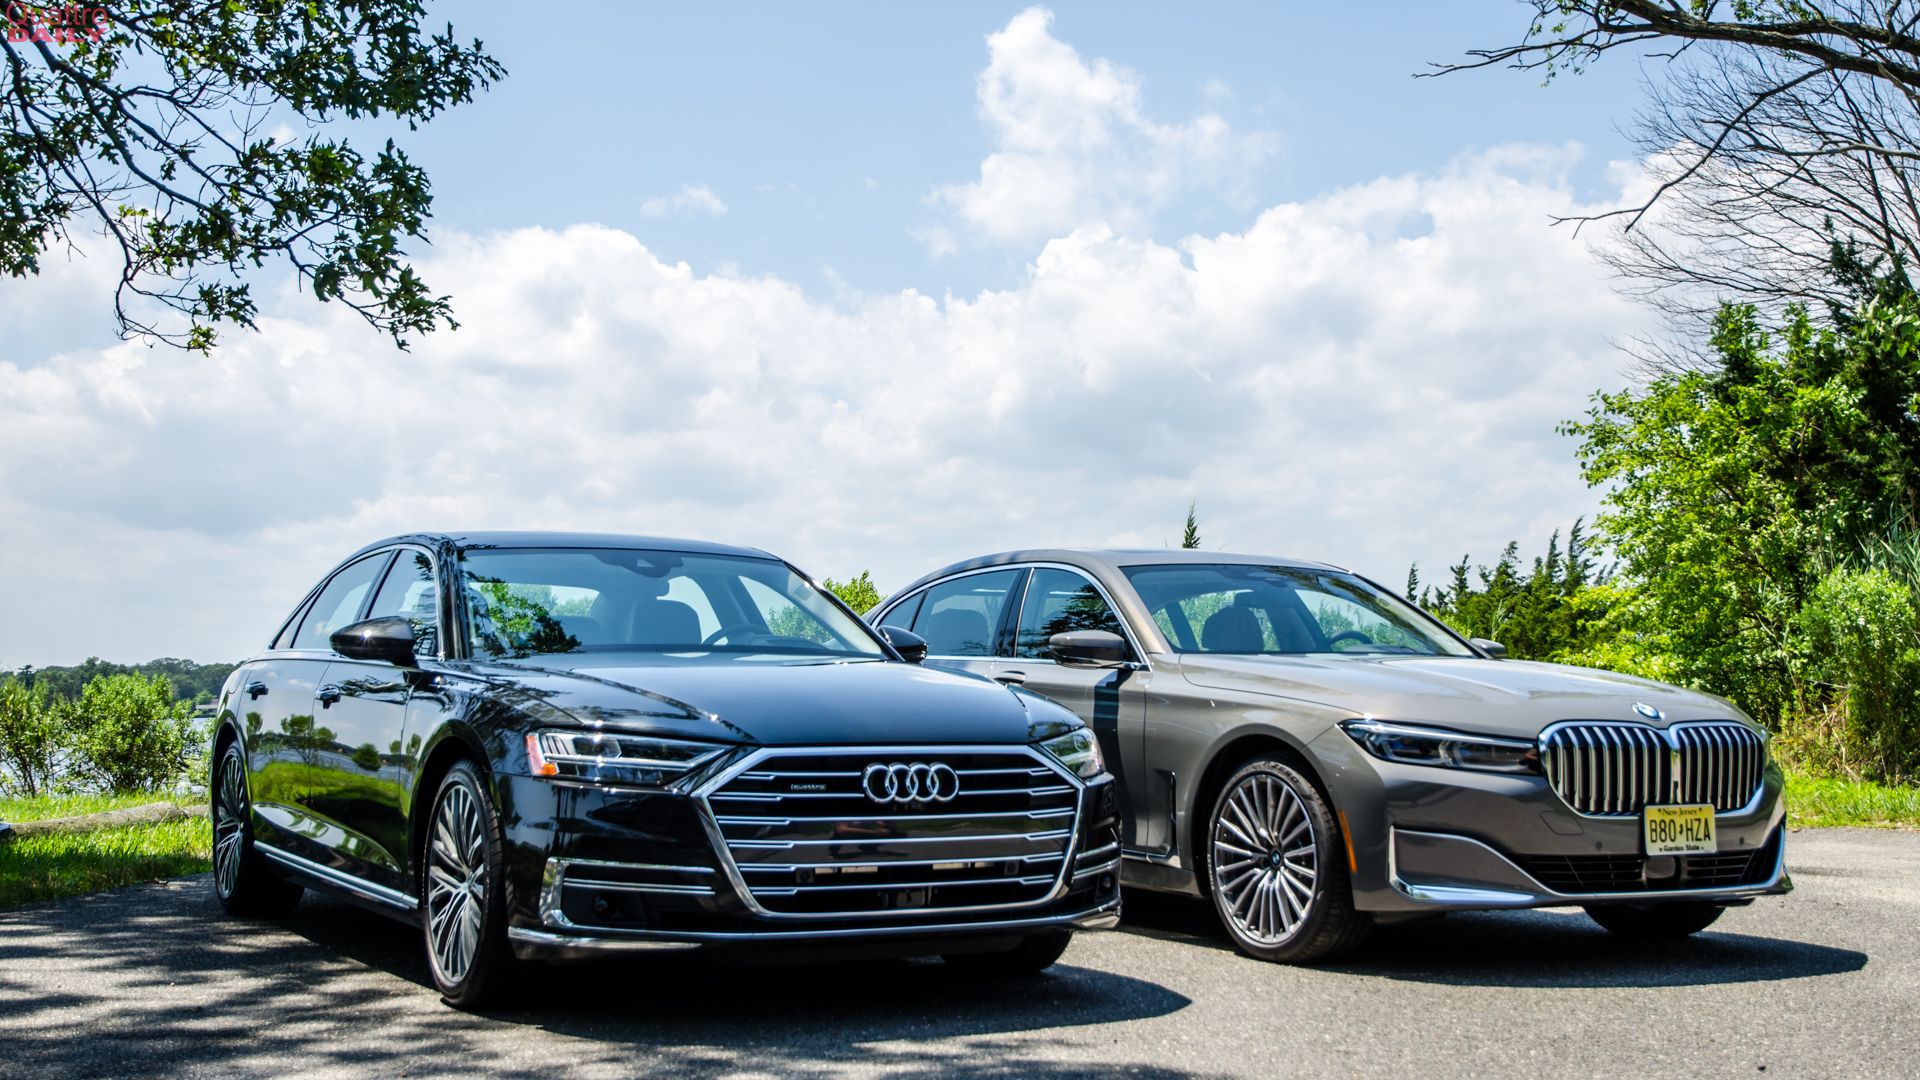 VIDEO REVIEW: 2019 BMW 750i vs 2019 Audi A8L - Luxury Face Off